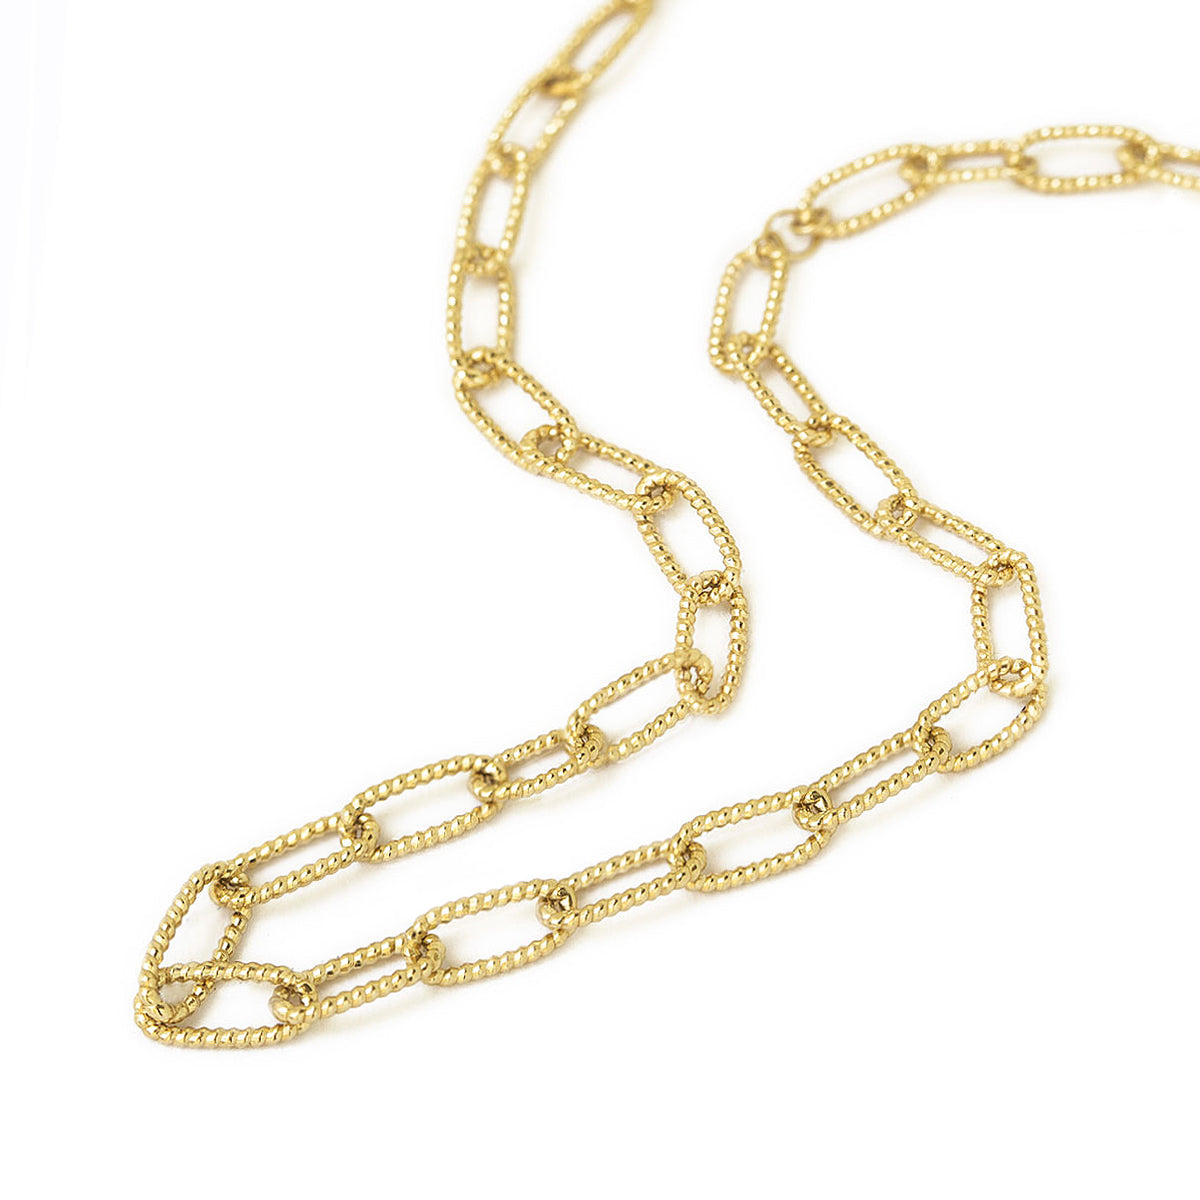 Textured Gold Chunky Link Chain Necklace